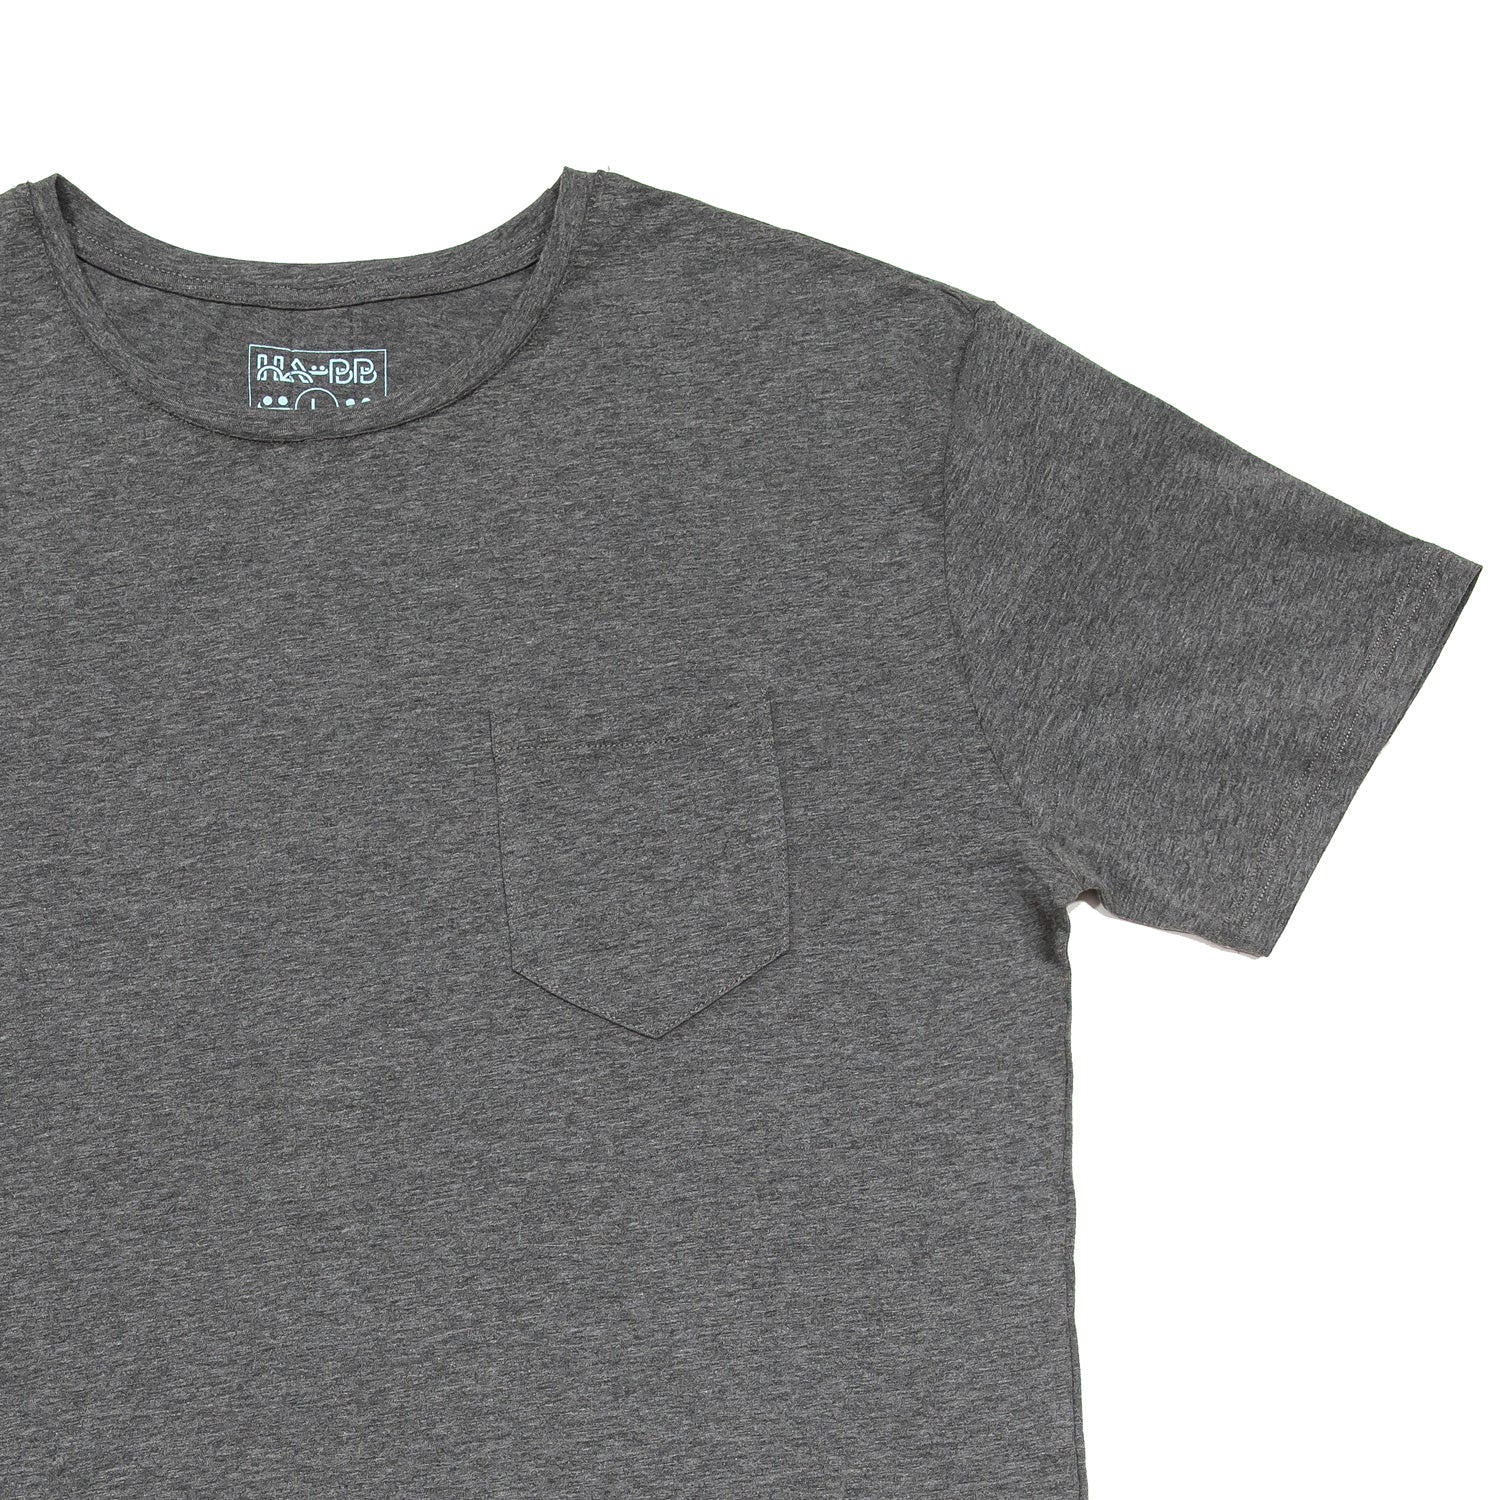 grey T-shirt, tee, front pocket, embroidery signature, iconic, detail view, short sleeve